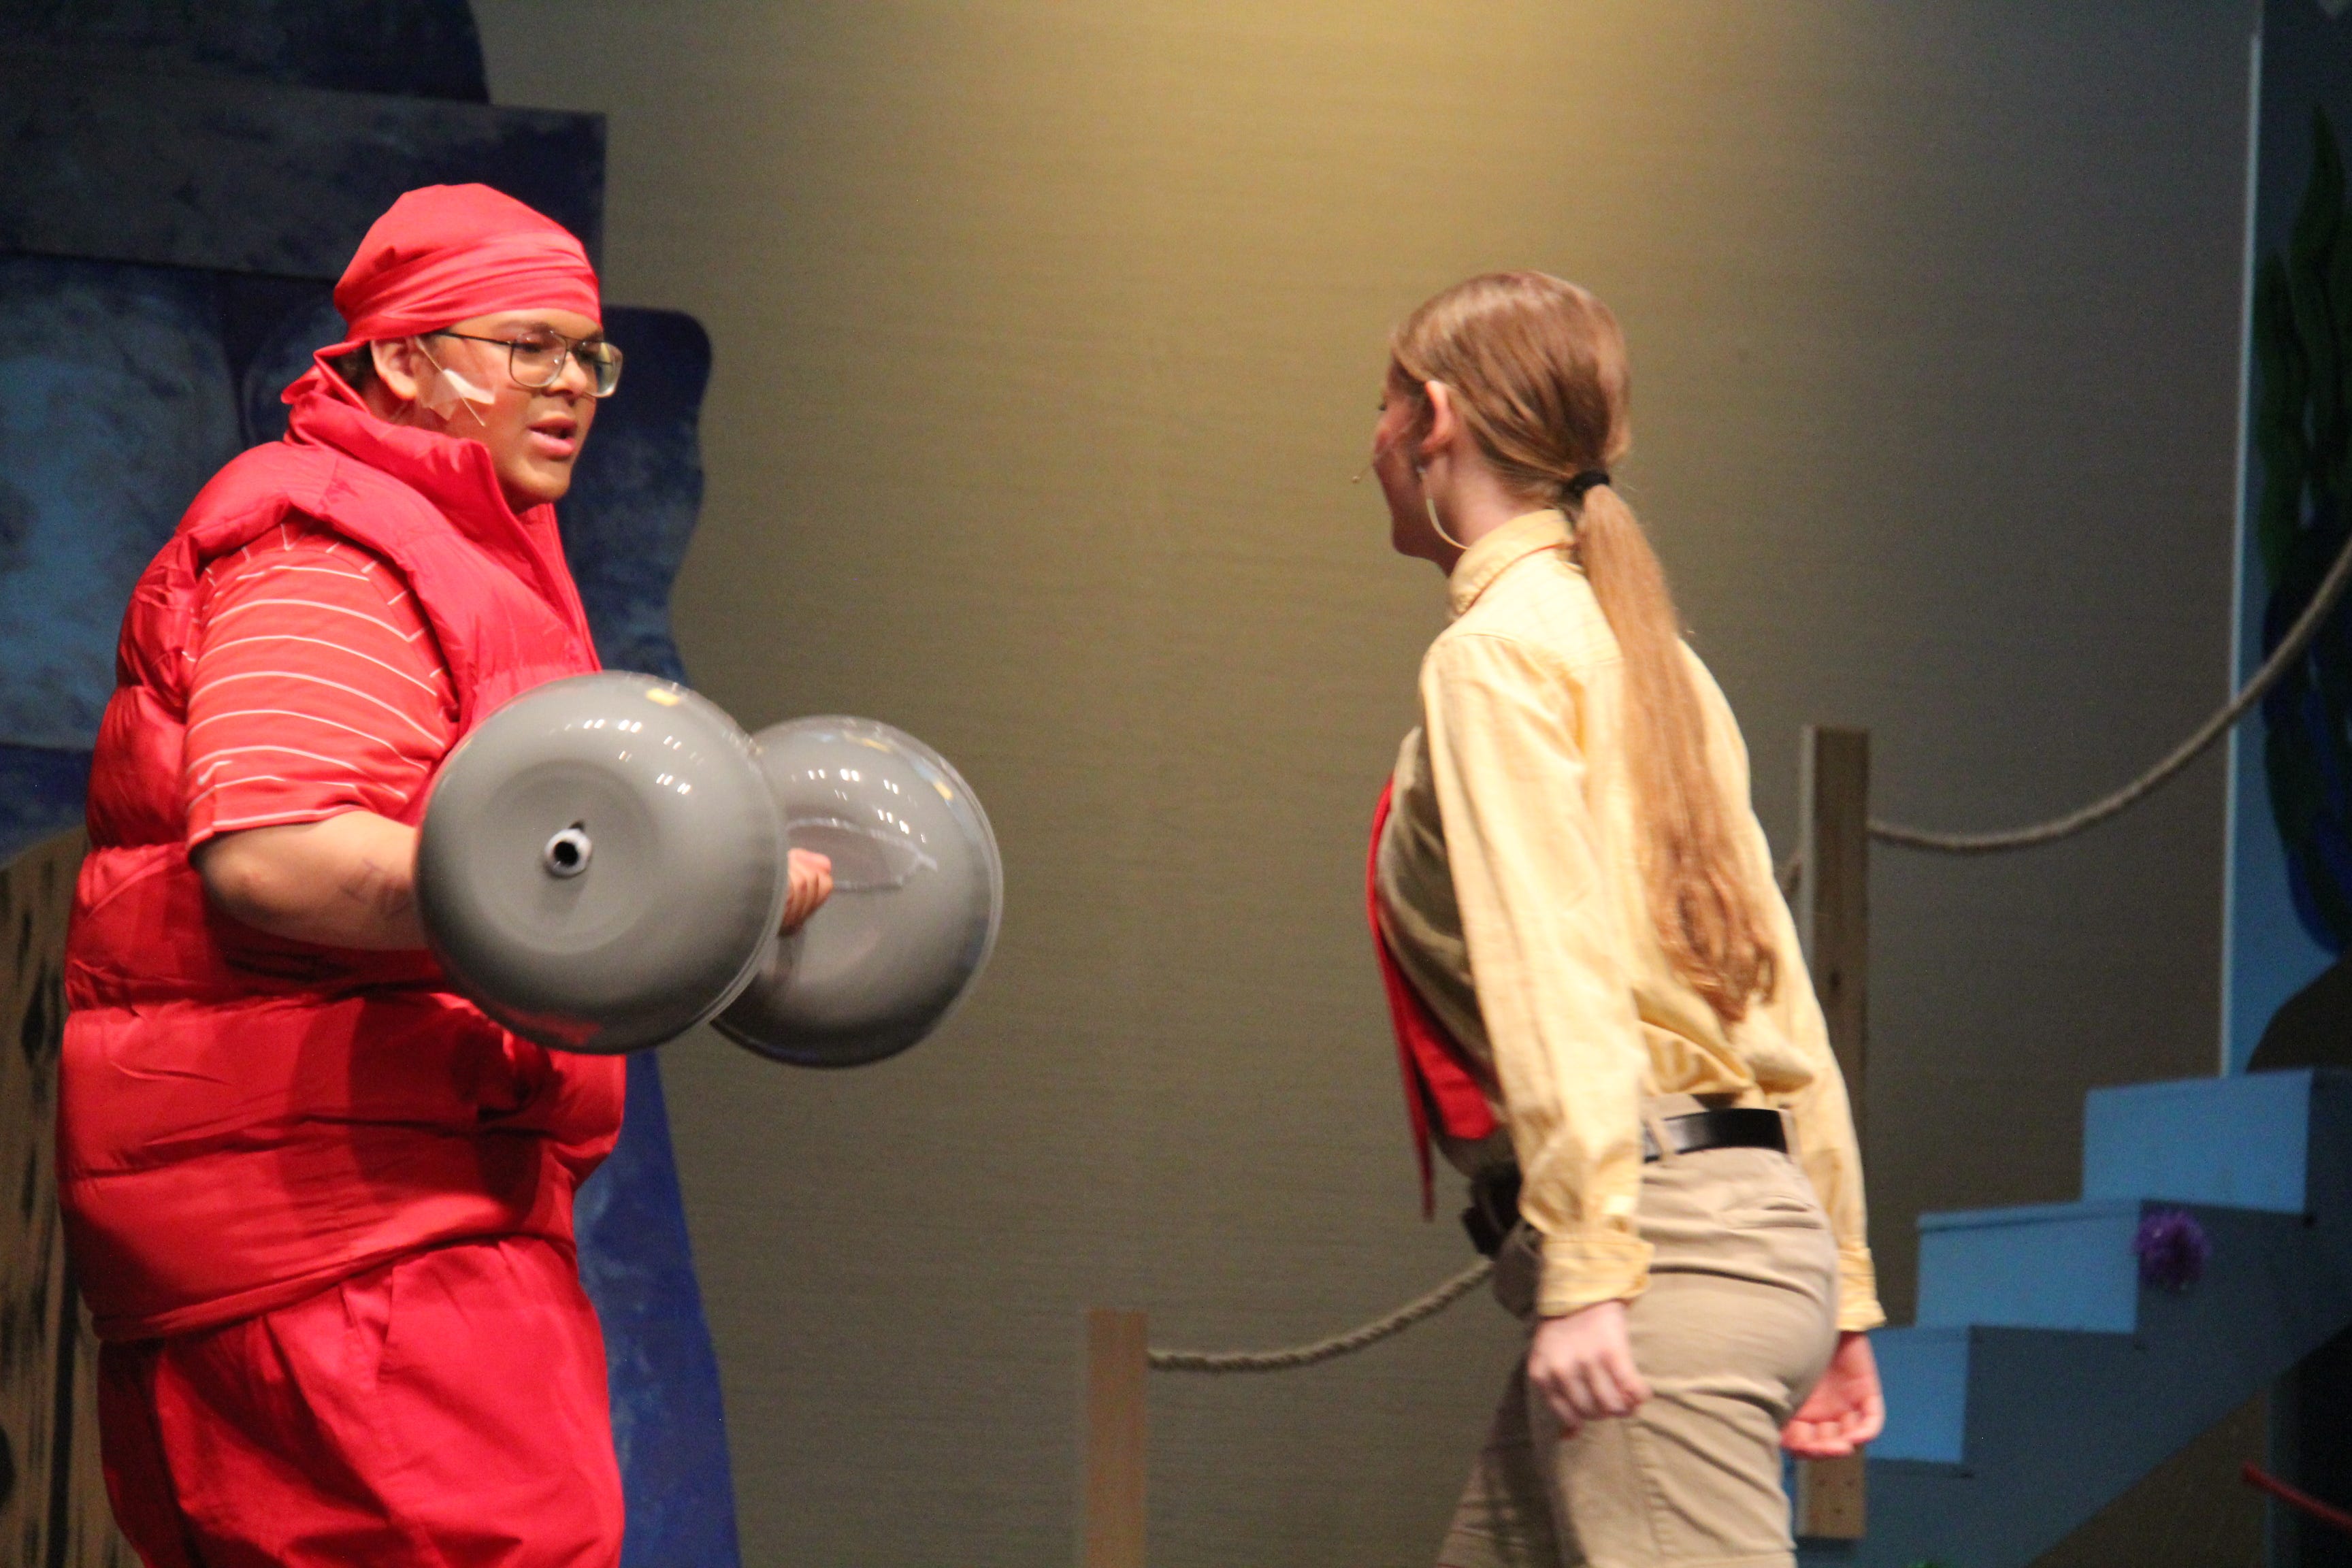 JeanCarlos Santiago-Puente, as Larry the Lobster, performs a scene from “The SpongeBob Musical.”